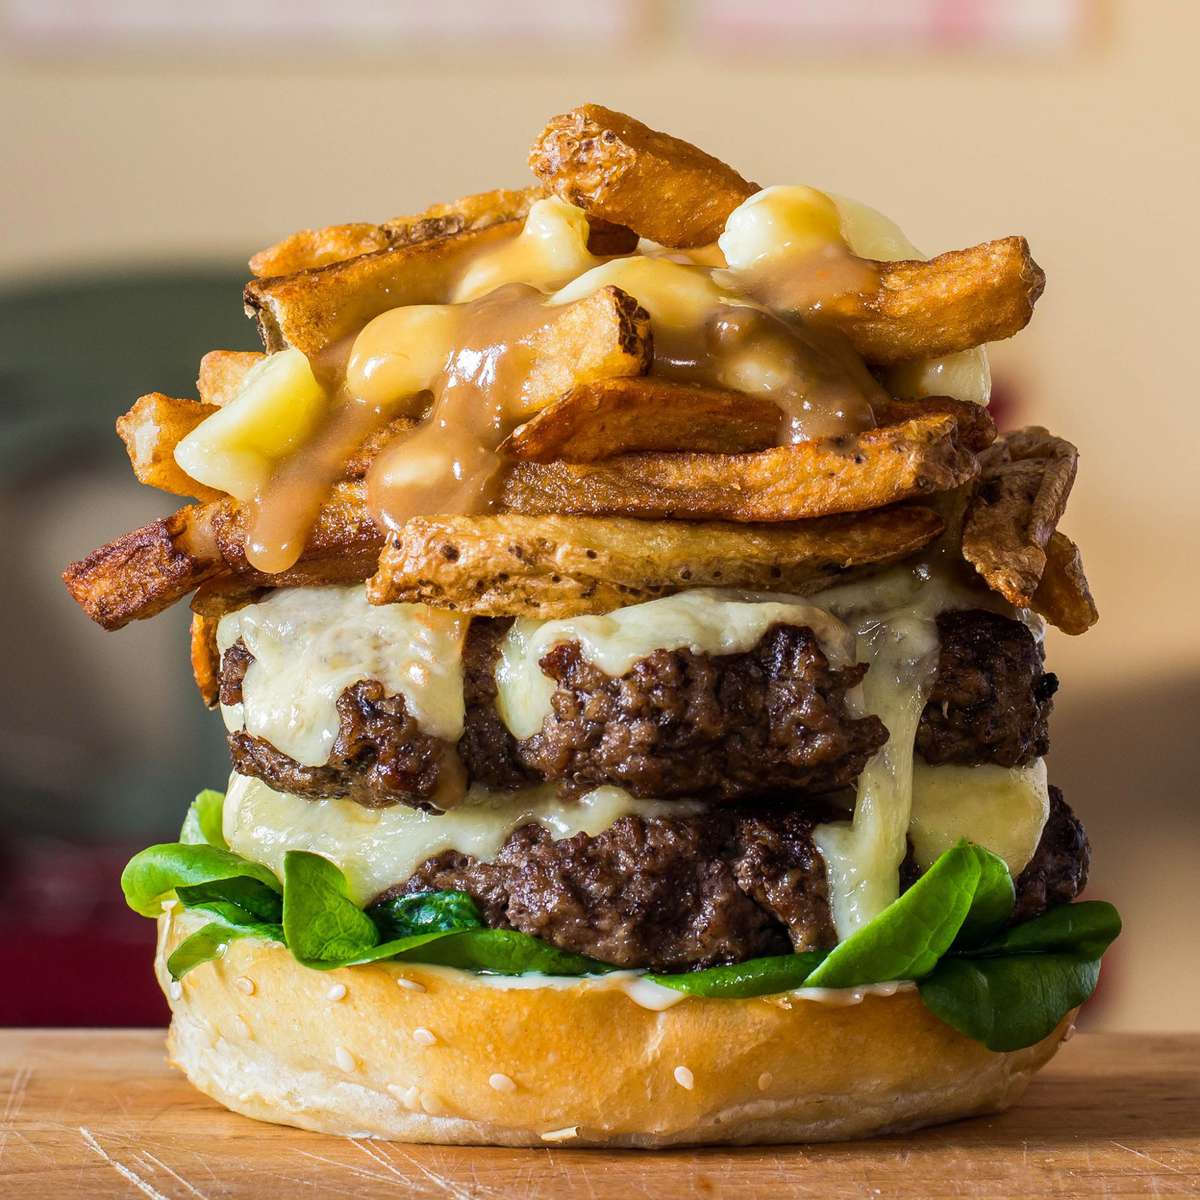 The Double Cheese Poutine Burger